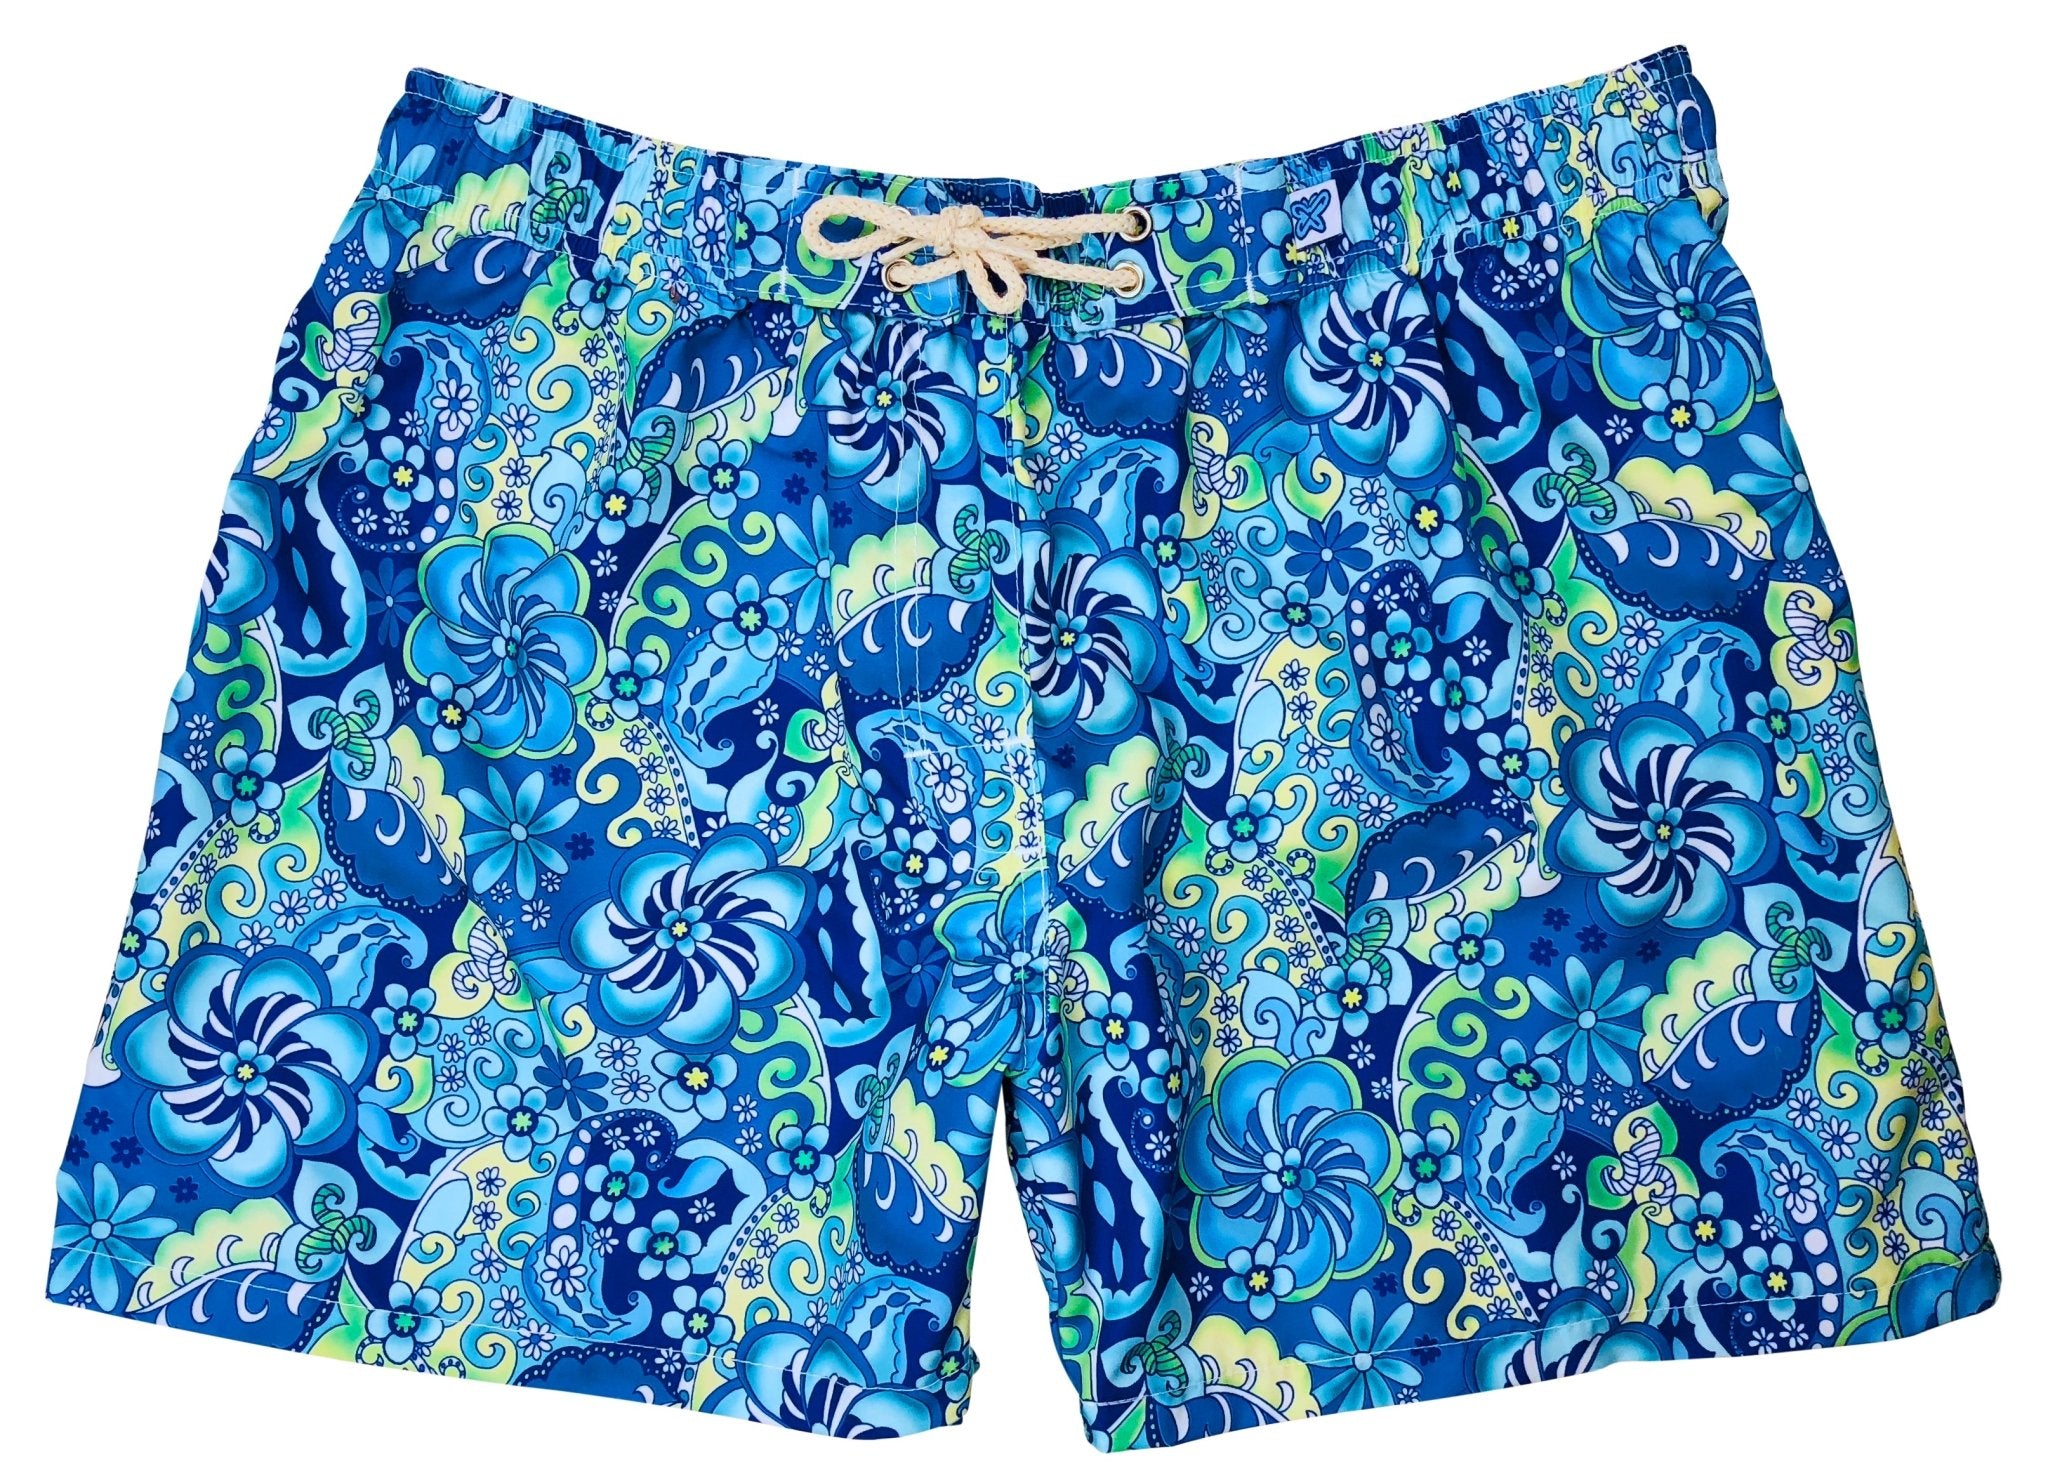 "Lucy in the Sky" (Blue) Womens Elastic Waist Swim Board Shorts. REGULAR Rise + 5" Inseam - Board Shorts World Outlet